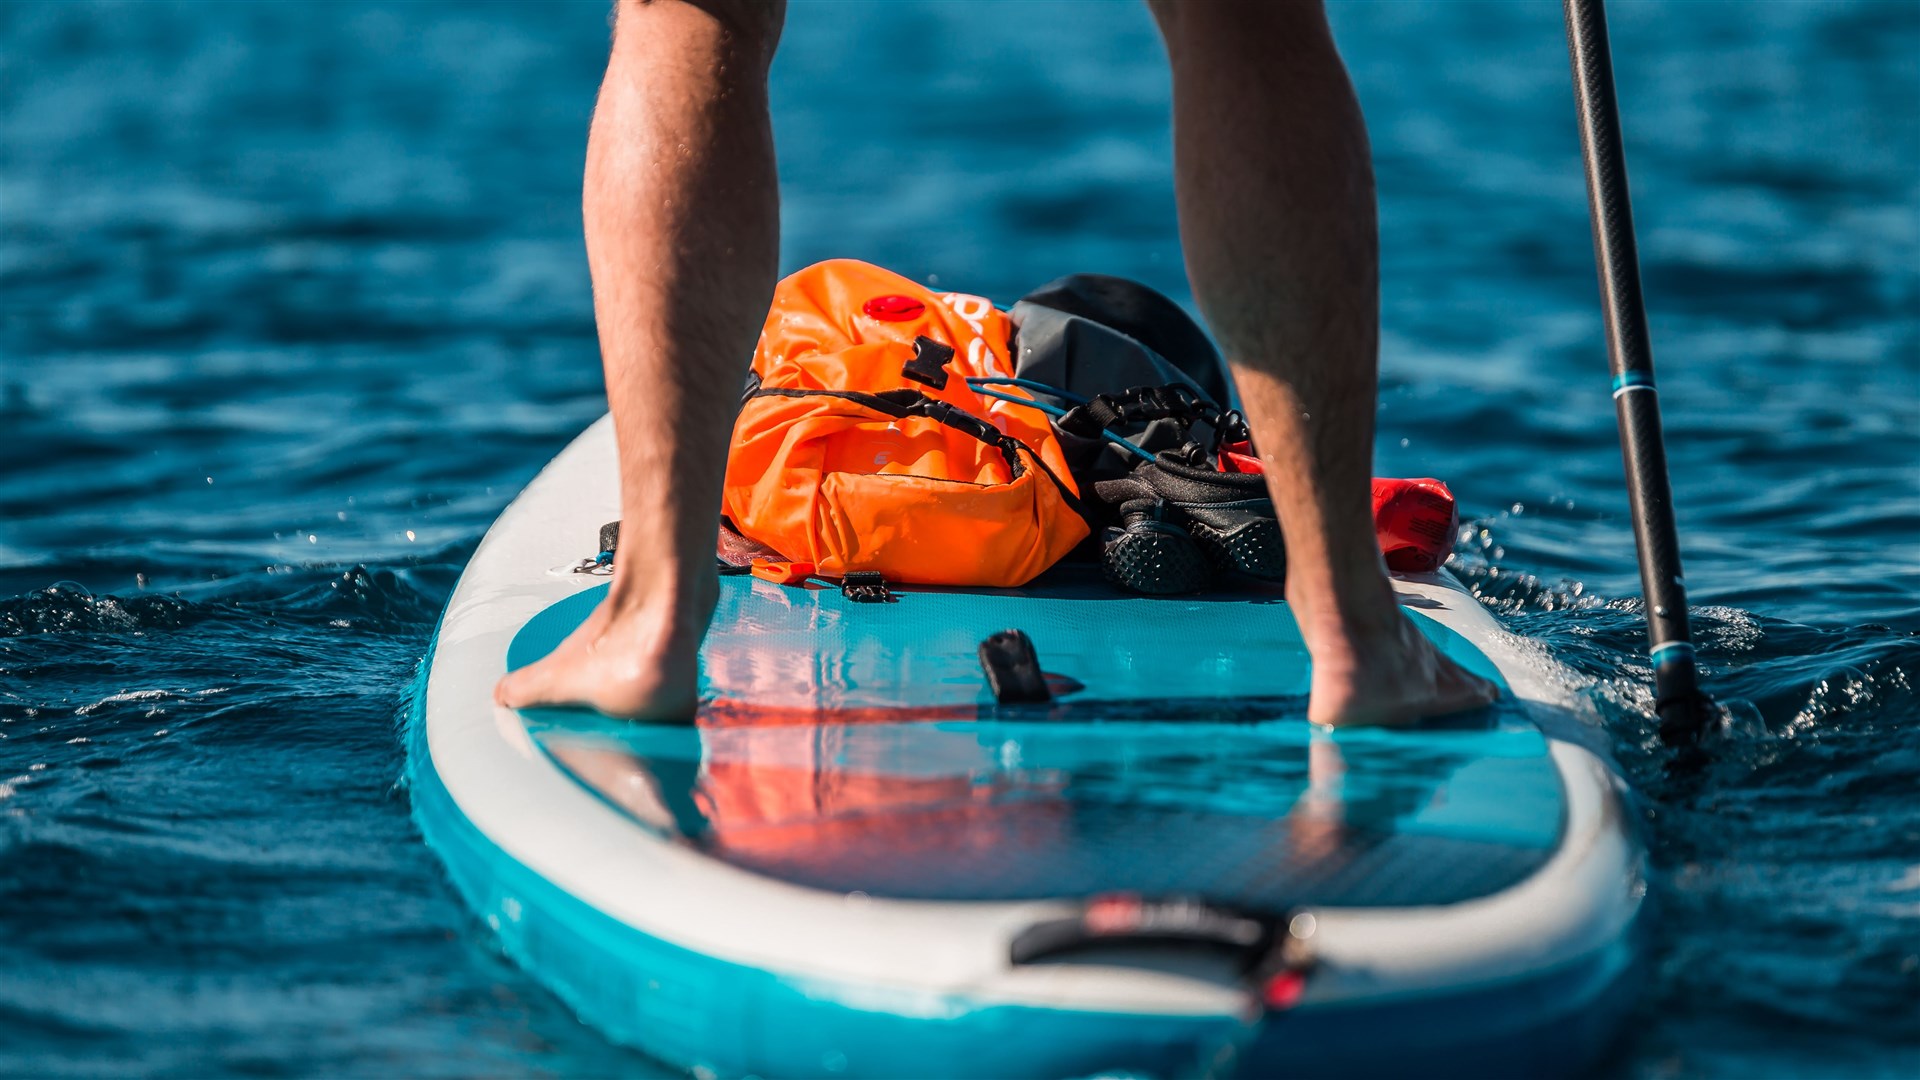 RNLI Kessock lifeboat has urged paddle boarders to check they are fully equipped in case of emergency.